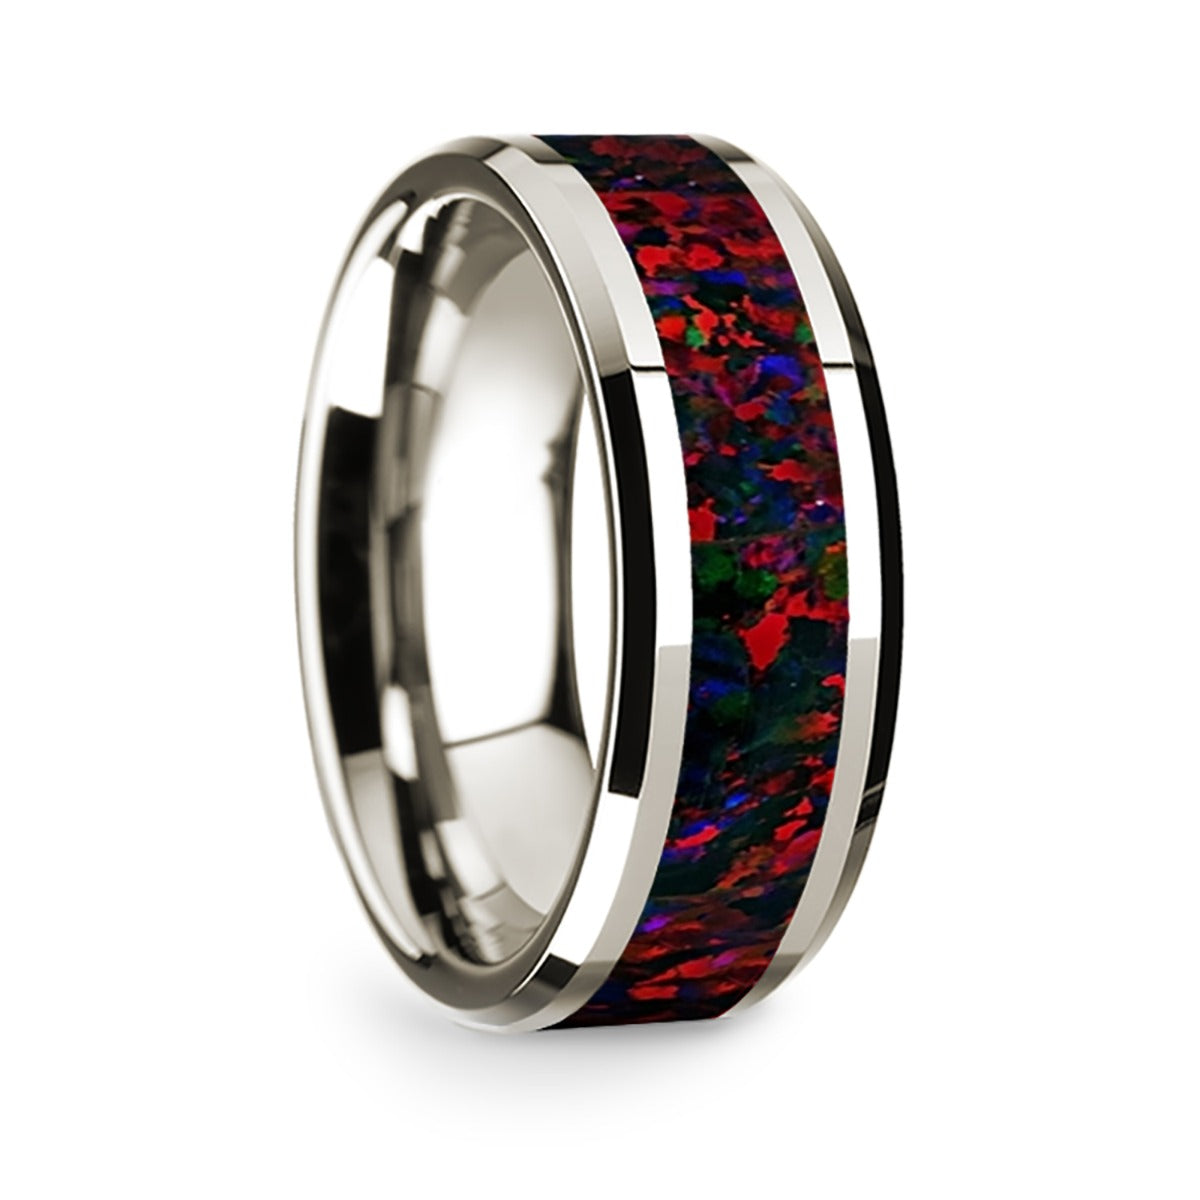 14k White Gold Men's Wedding Band with Black & Red Opal Inlay